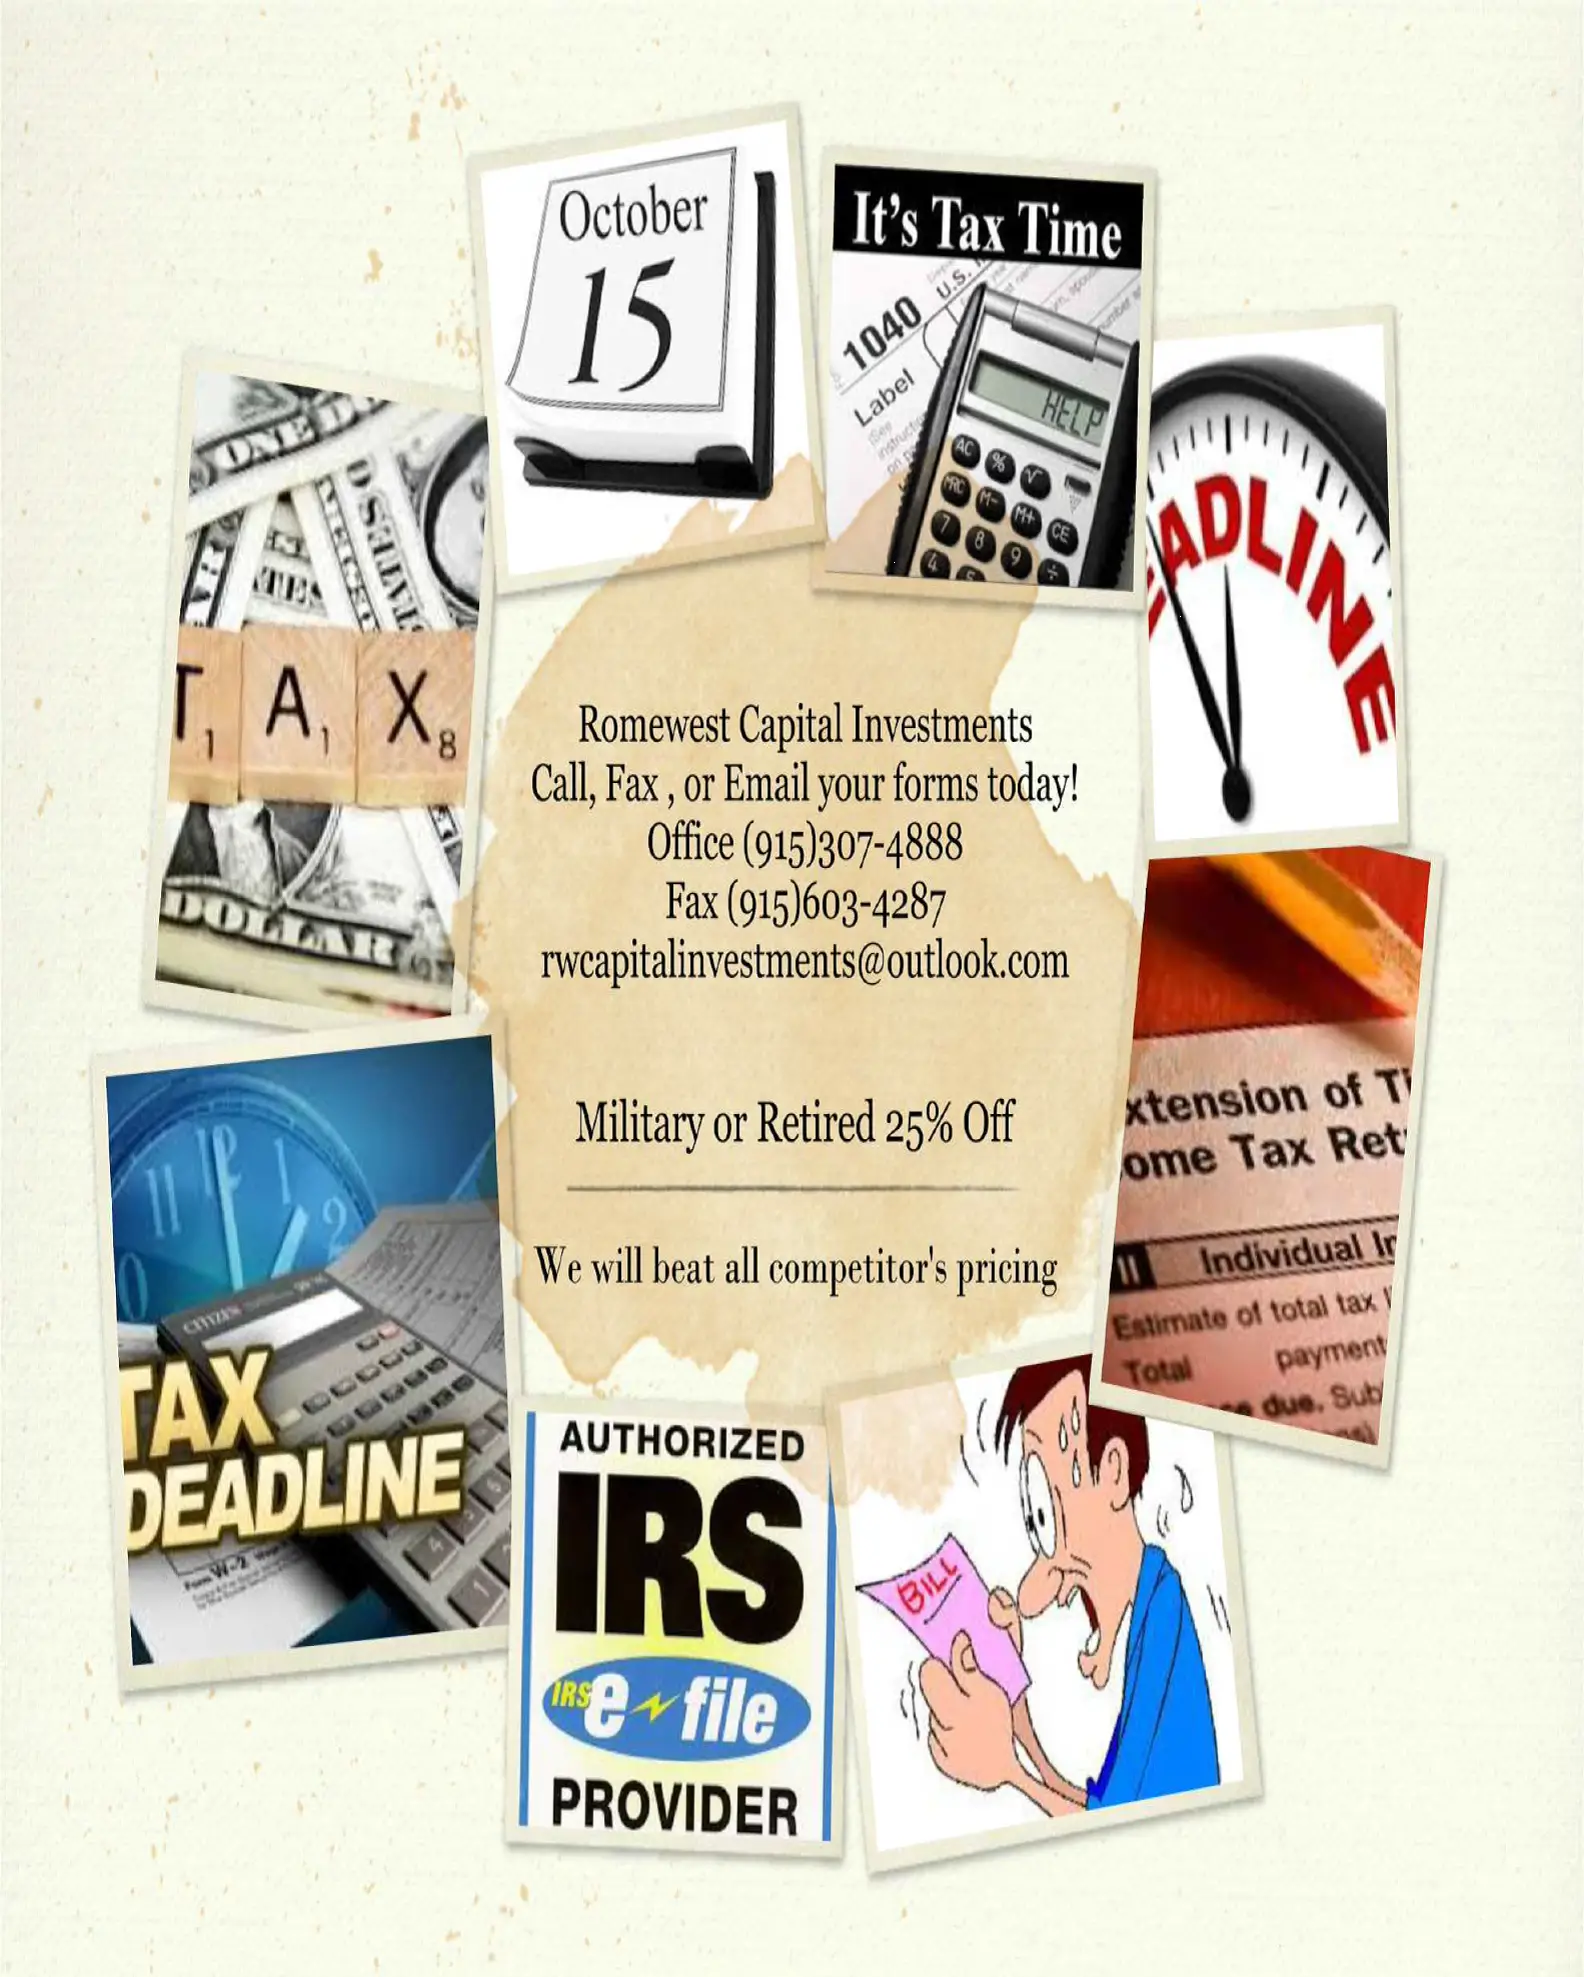 Did you file a Tax extension or haven